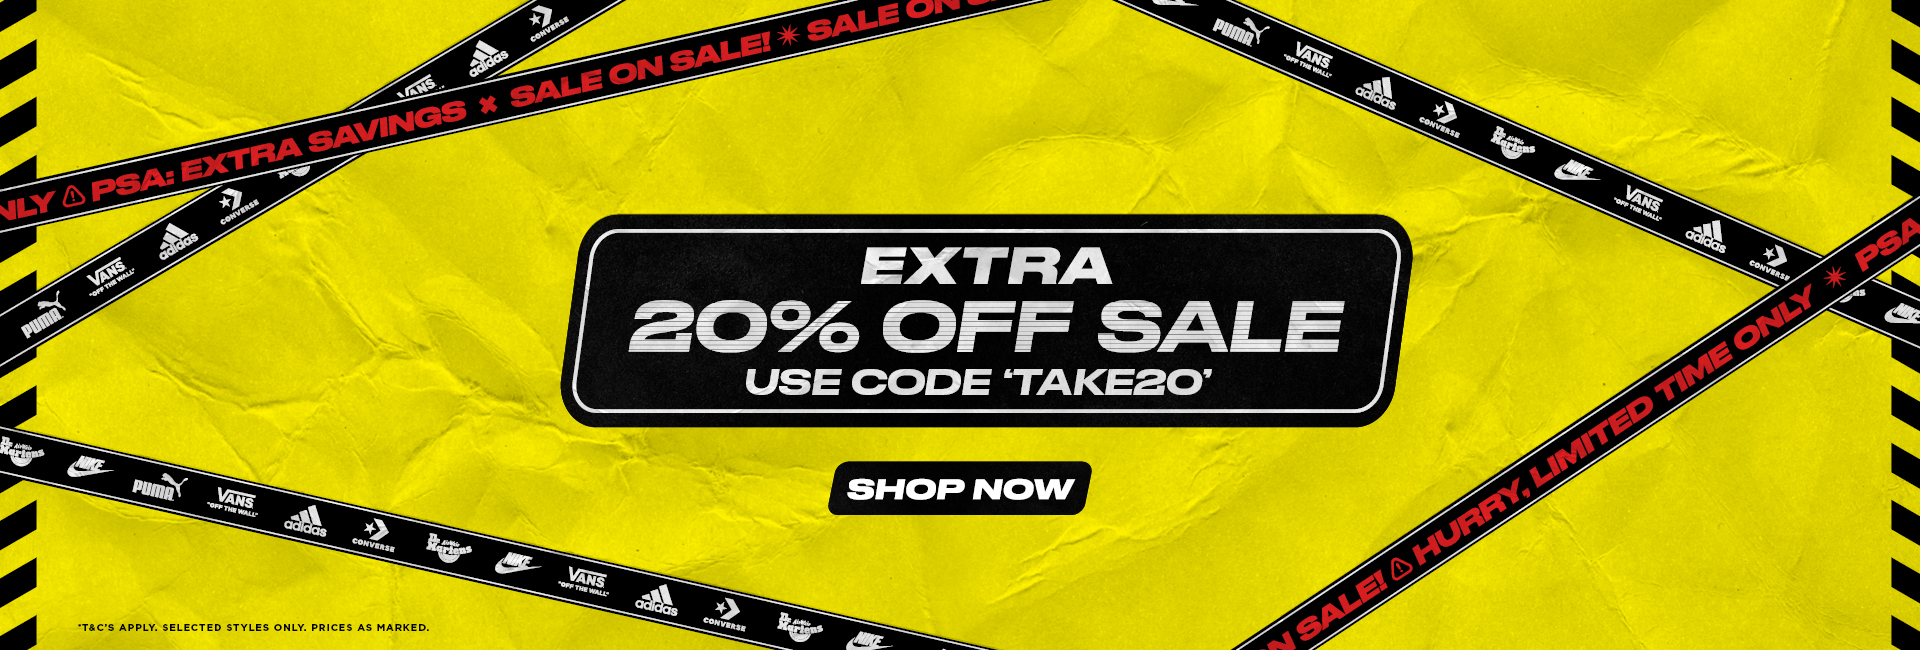 Take a further extra 20% OFF on sale styles